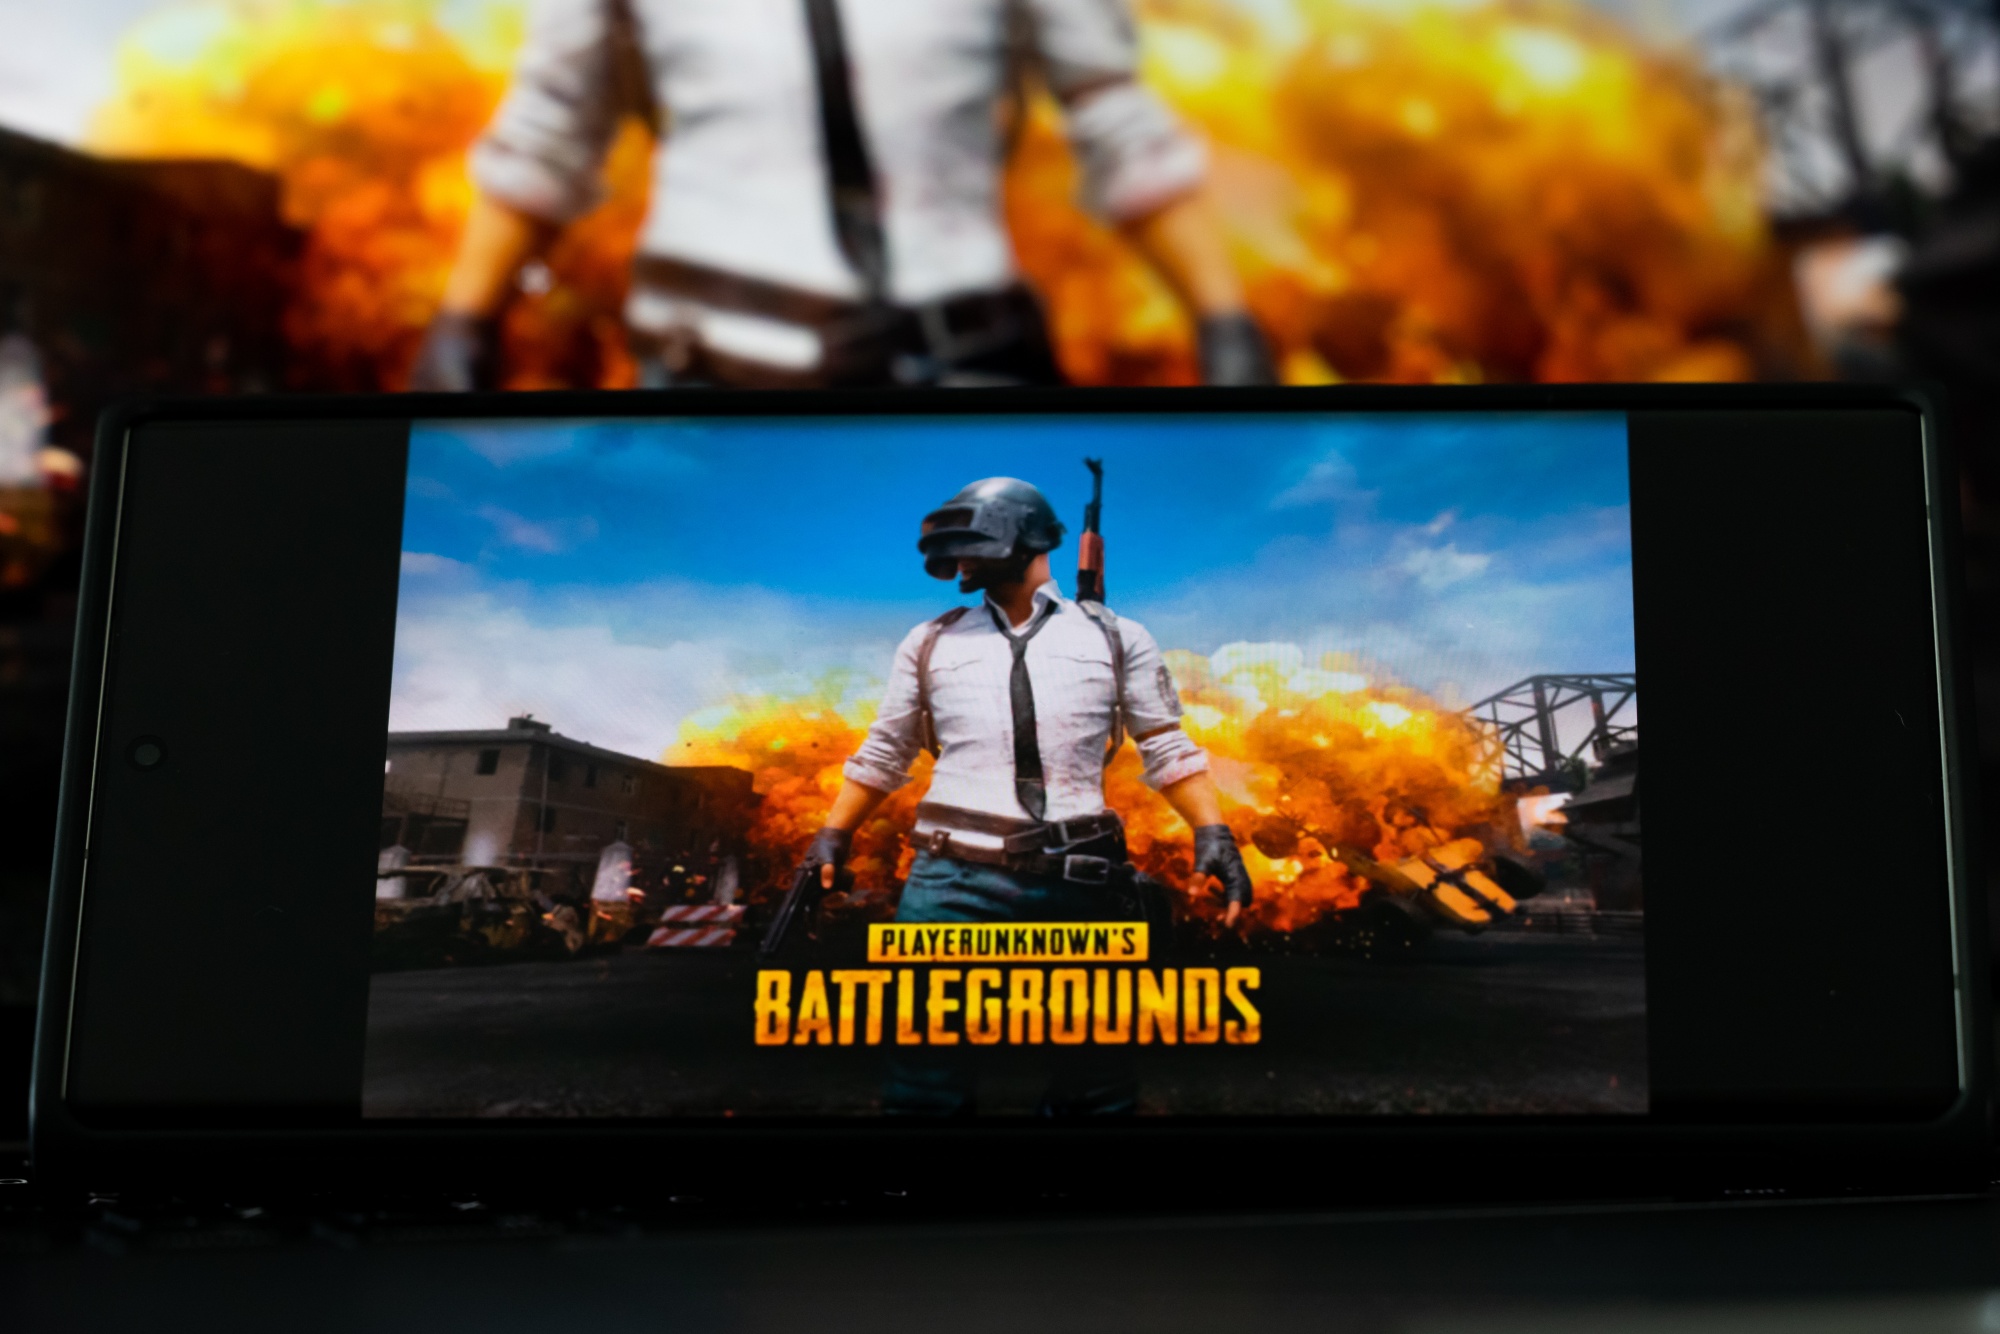 PlayerUnknown’s Battlegrounds game displayed on a smartphone screen.